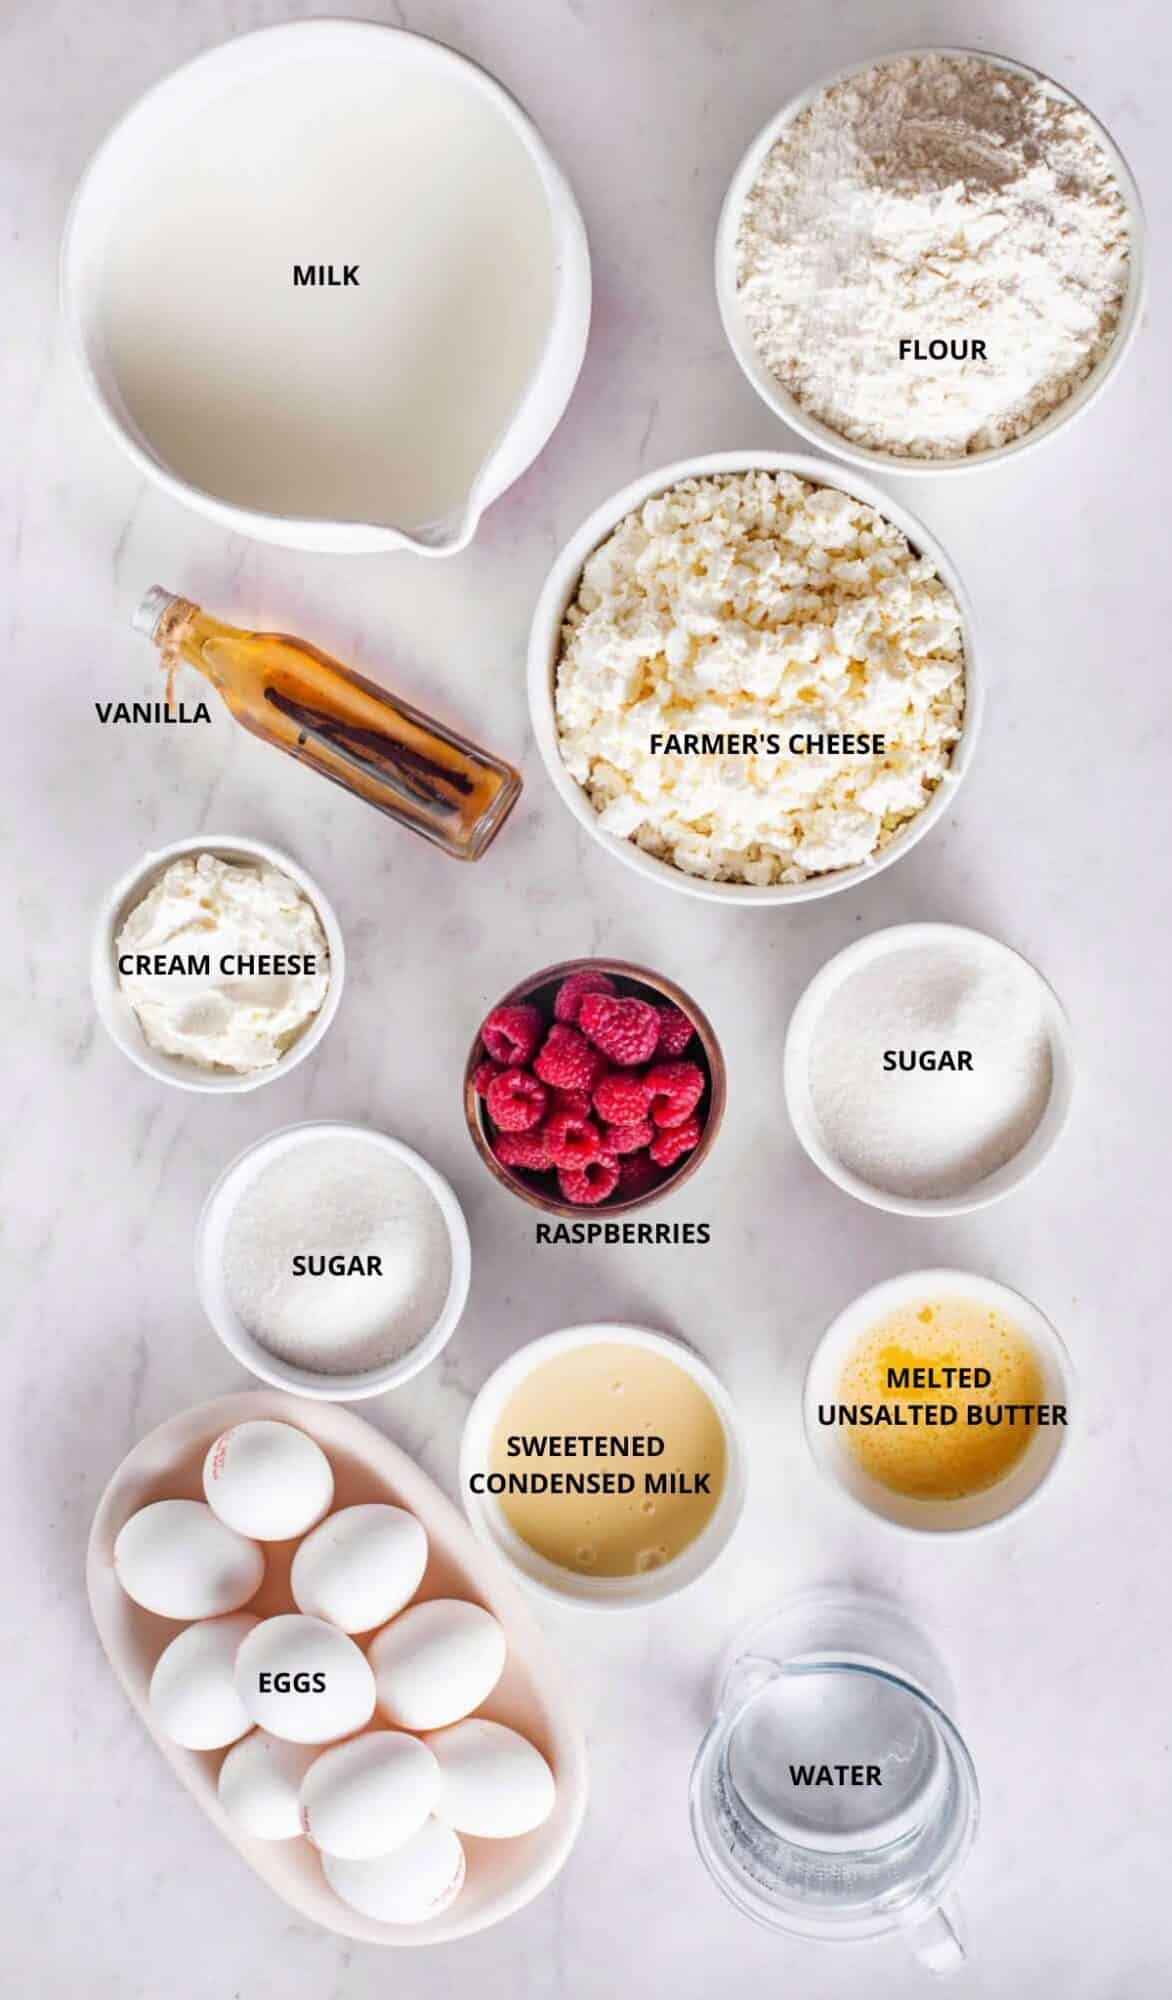 milk in a bowl flour in bowl farmer's cheese in a white bowl bottle of vanilla bowl of cream cheese wooden bowl with raspberries bowl of fine white sugar melted butter bowl of eggs bowl of condensed milk and water.